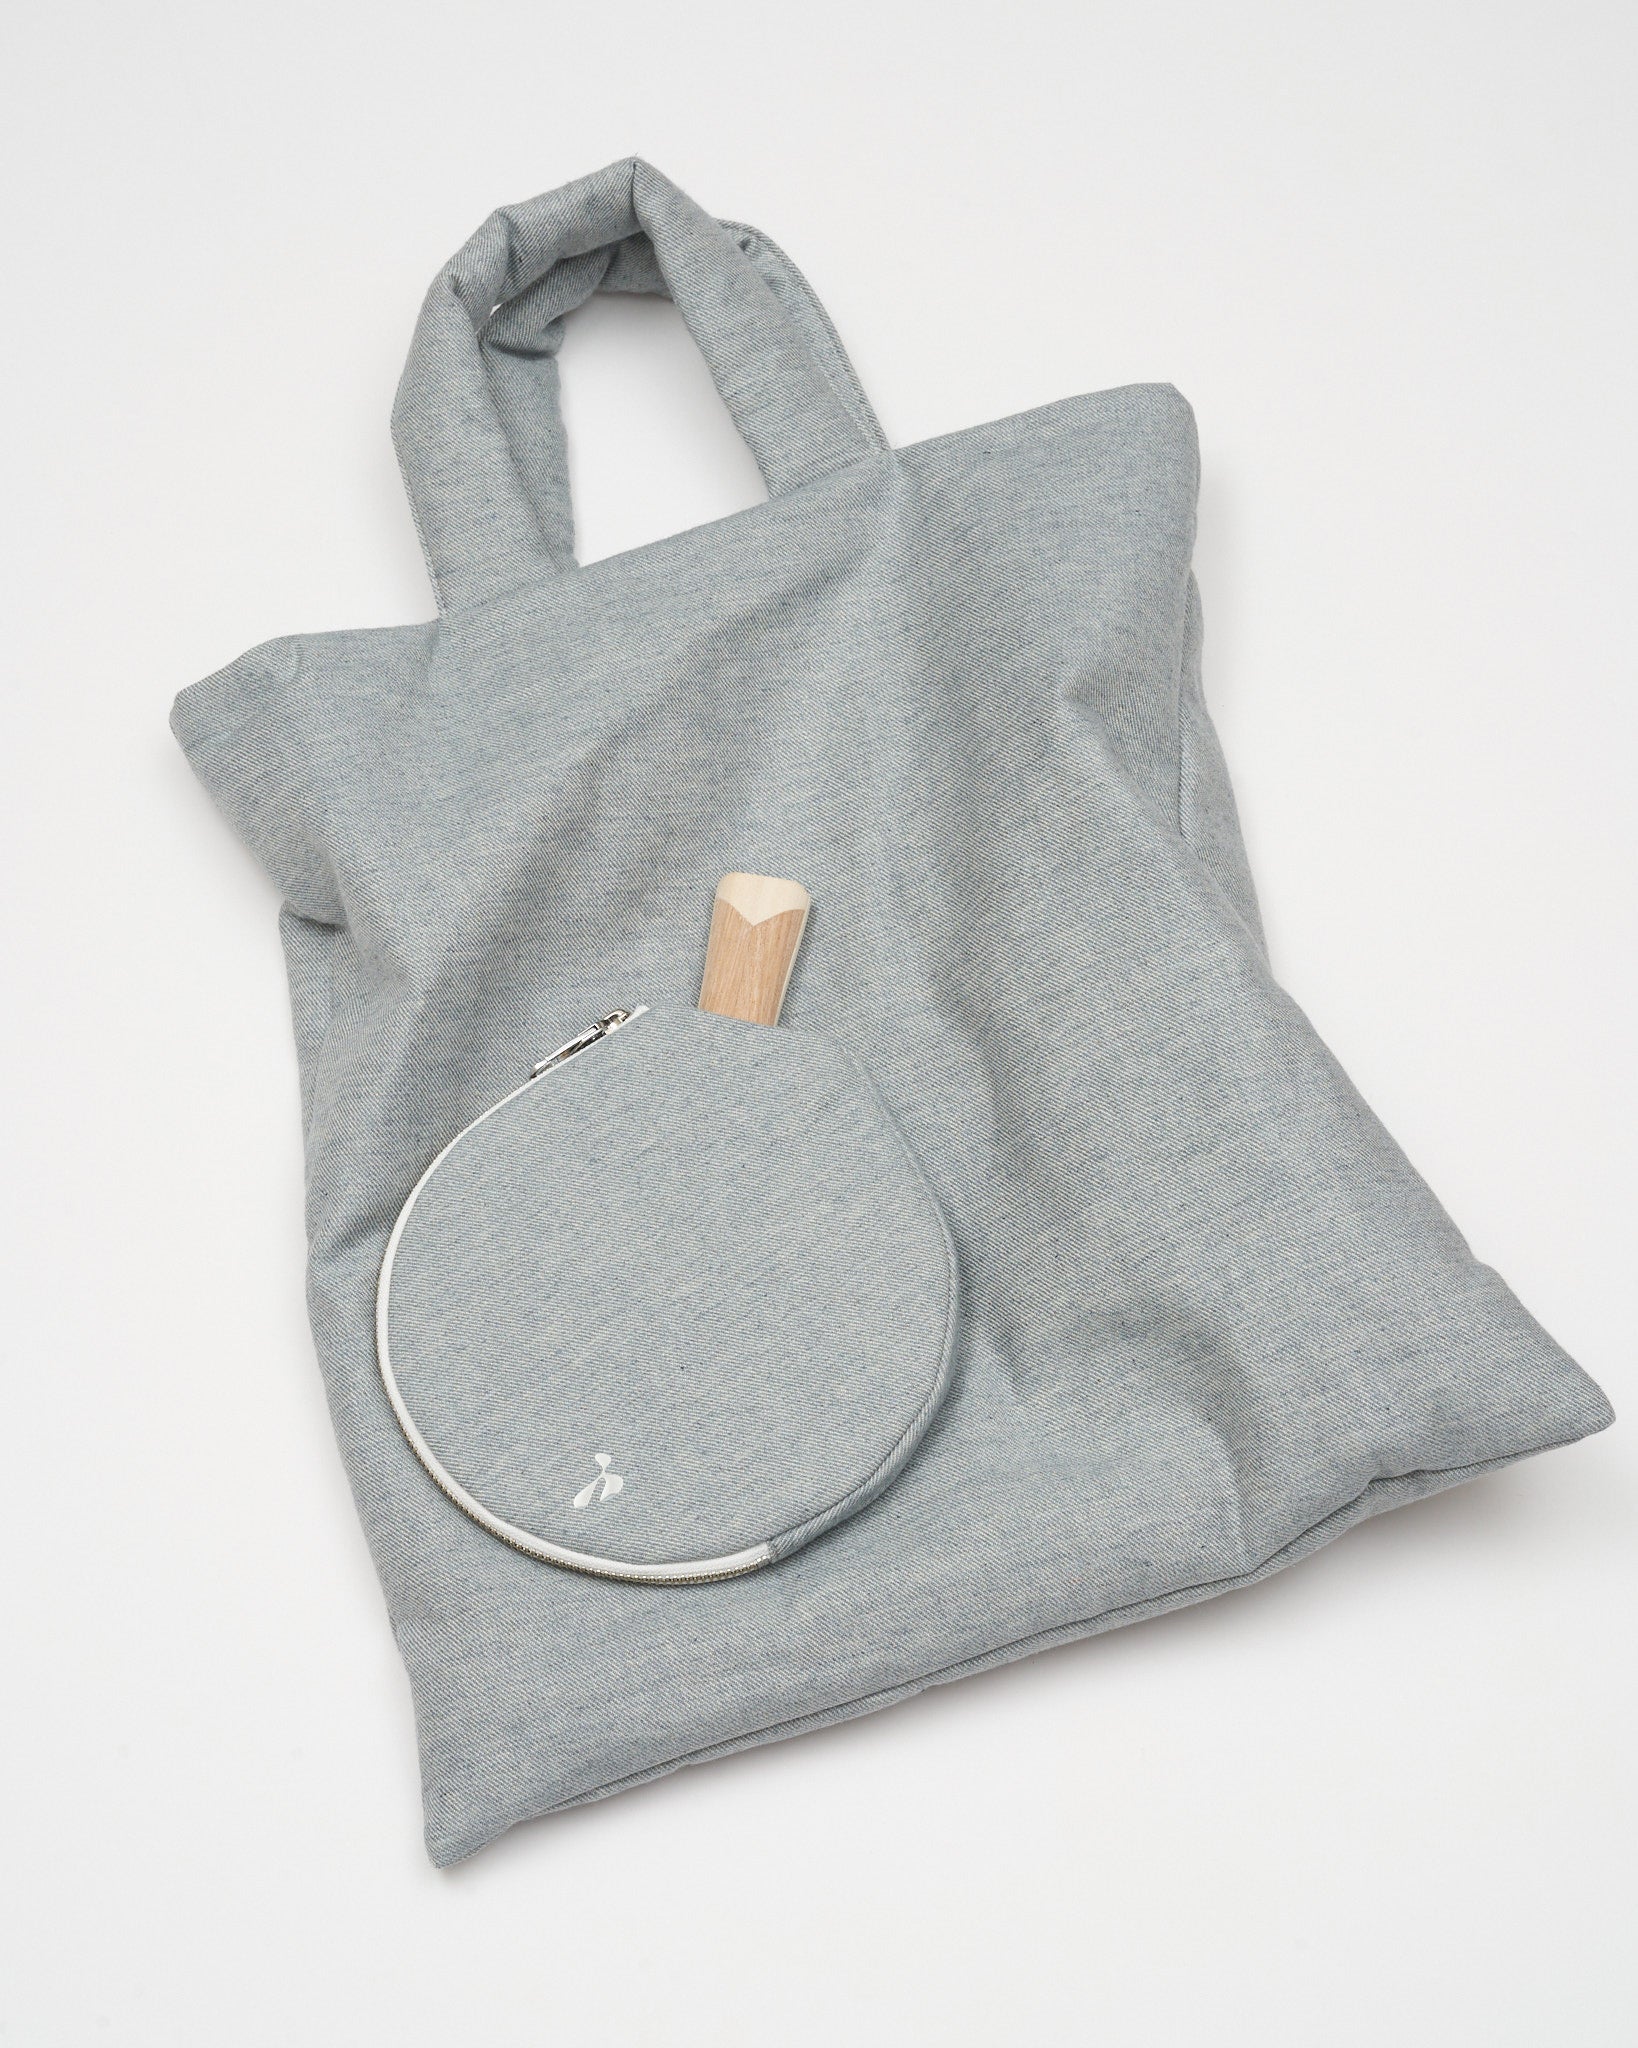 PING-PONG PADDED TOTE